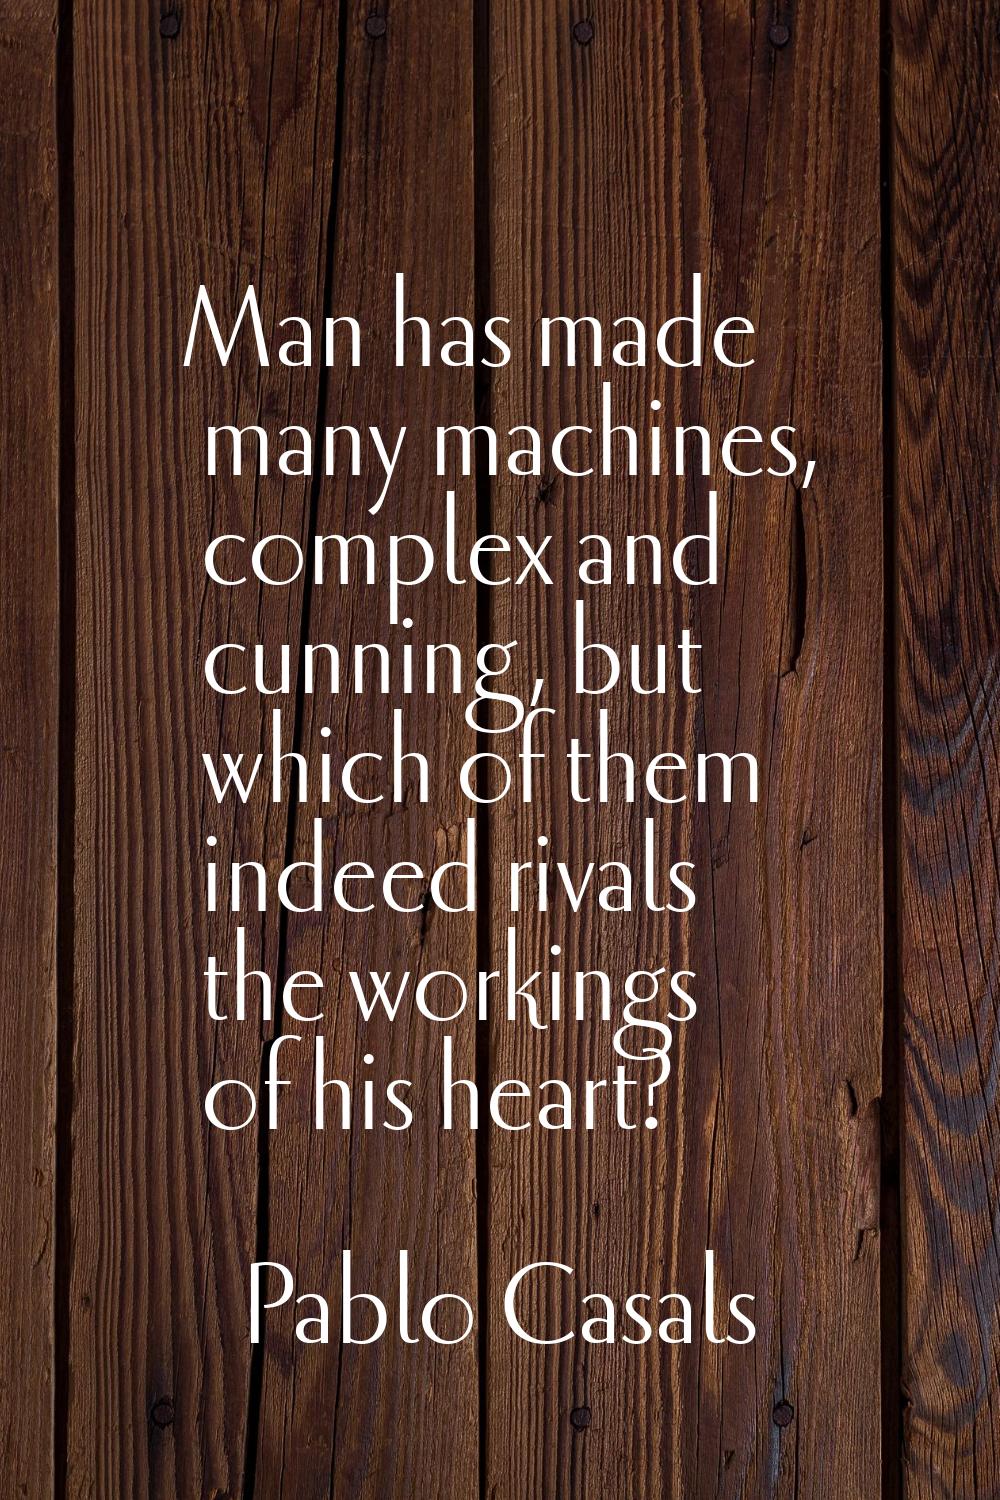 Man has made many machines, complex and cunning, but which of them indeed rivals the workings of hi